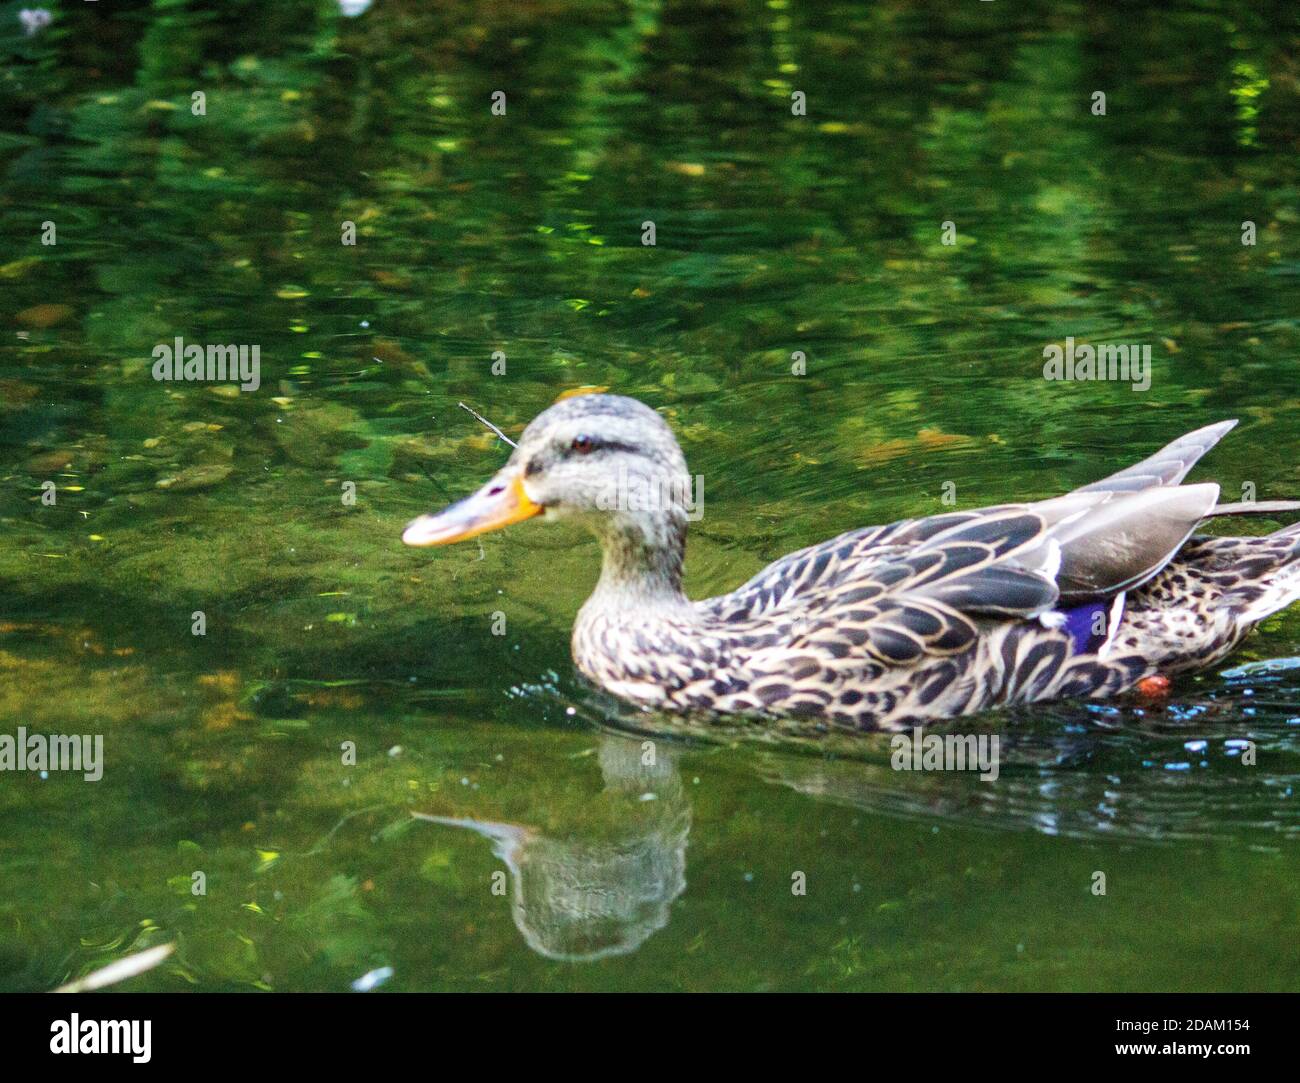 a Indian spot billed duck swimming in a pond, latin Anas poecilorhyncha Stock Photo